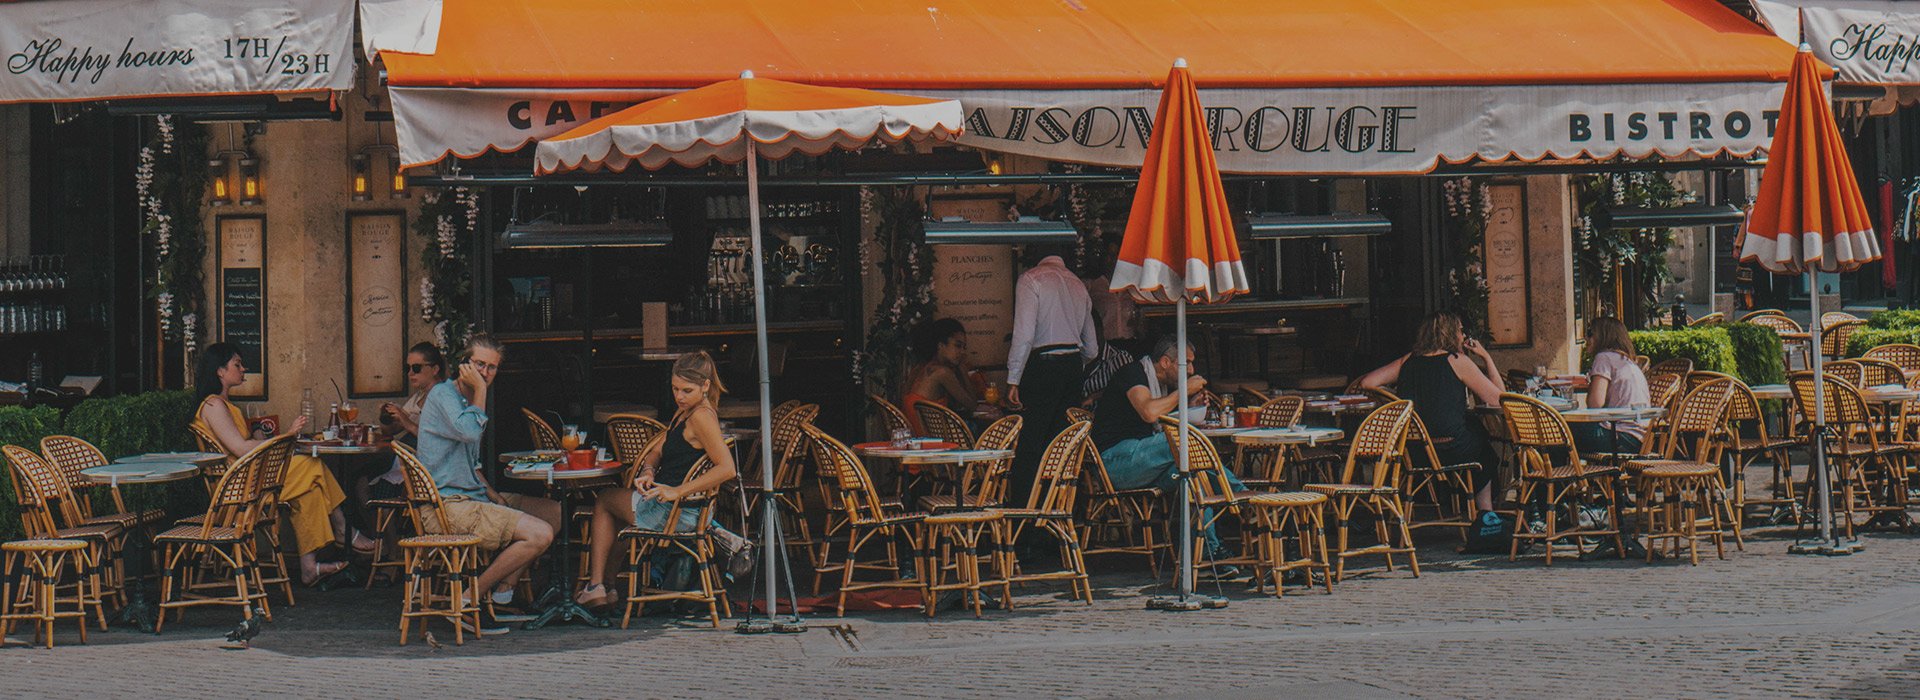 People sitting in front of the restaurant